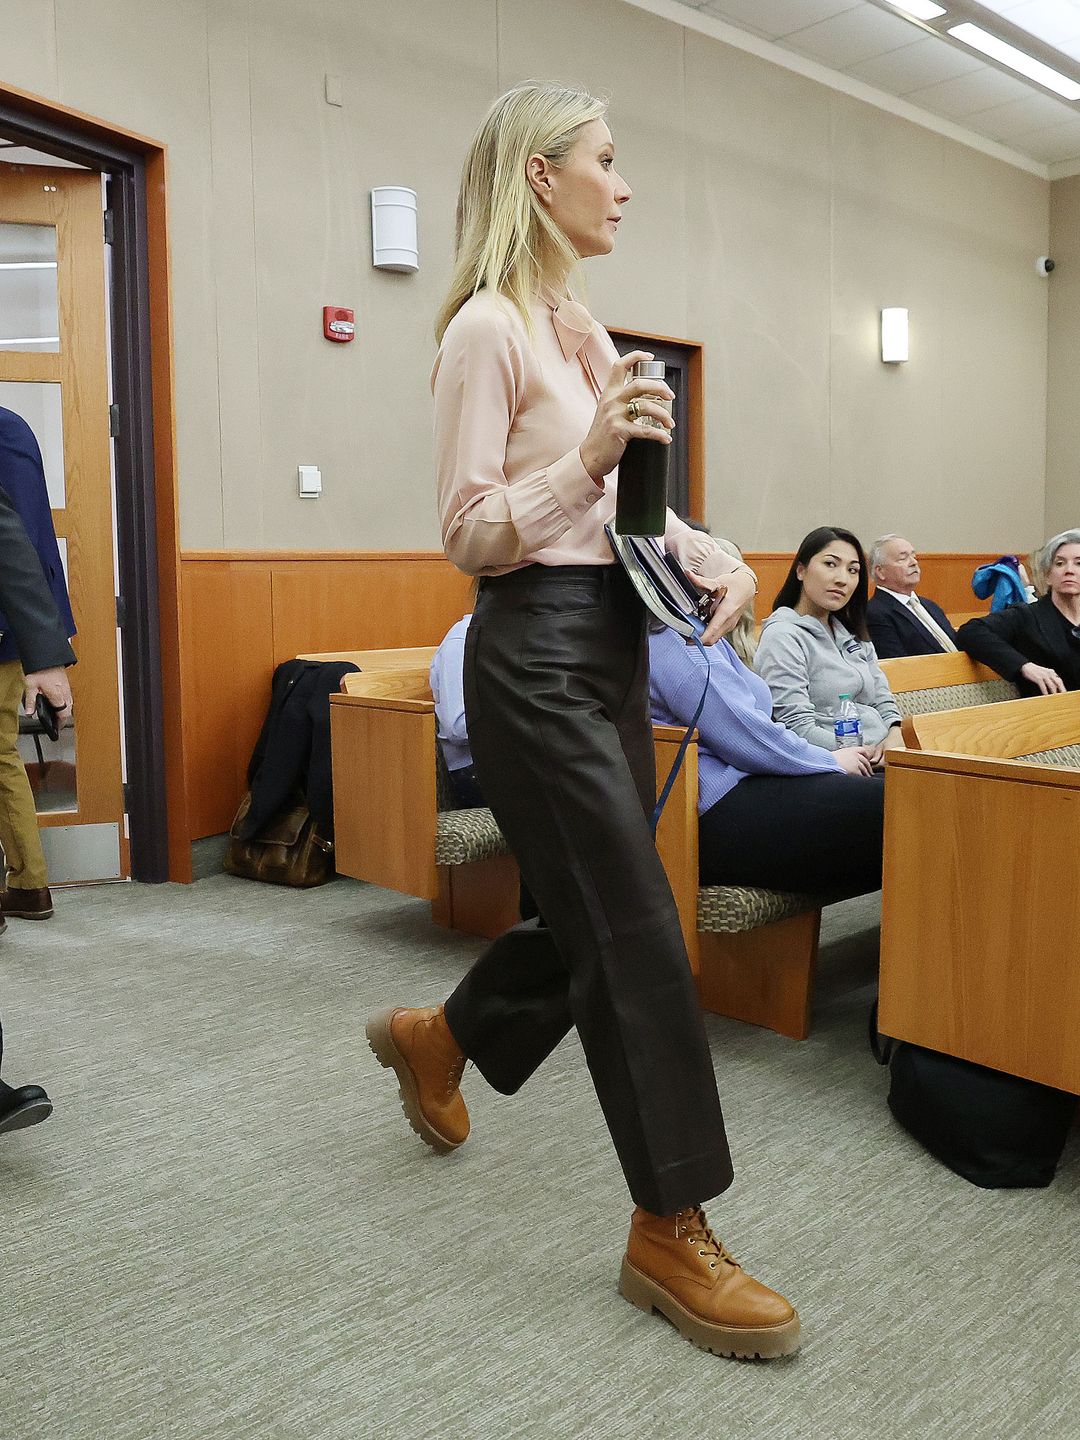 PARK CITY, UTAH - MARCH 28:  Actress Gwyneth Paltrow enters the court during her civil trial over a collision with another skier at the Park City District Courthouse on March 28, 2023, in Park City, Utah. Retired optometrist Terry Sanderson is suing Paltr